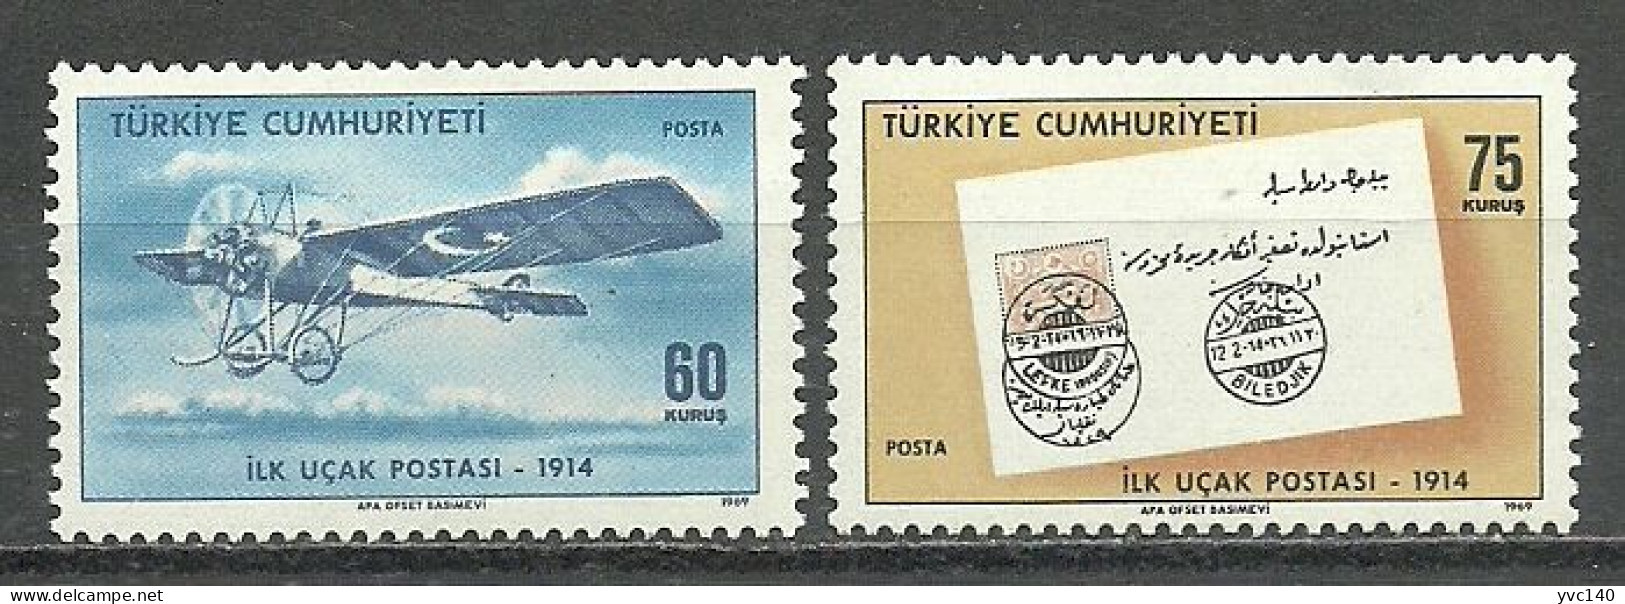 Turkey; 1969 55th Anniv. Of The Usage Of The Plane For Postage In (Complete Set) MNH** - Unused Stamps